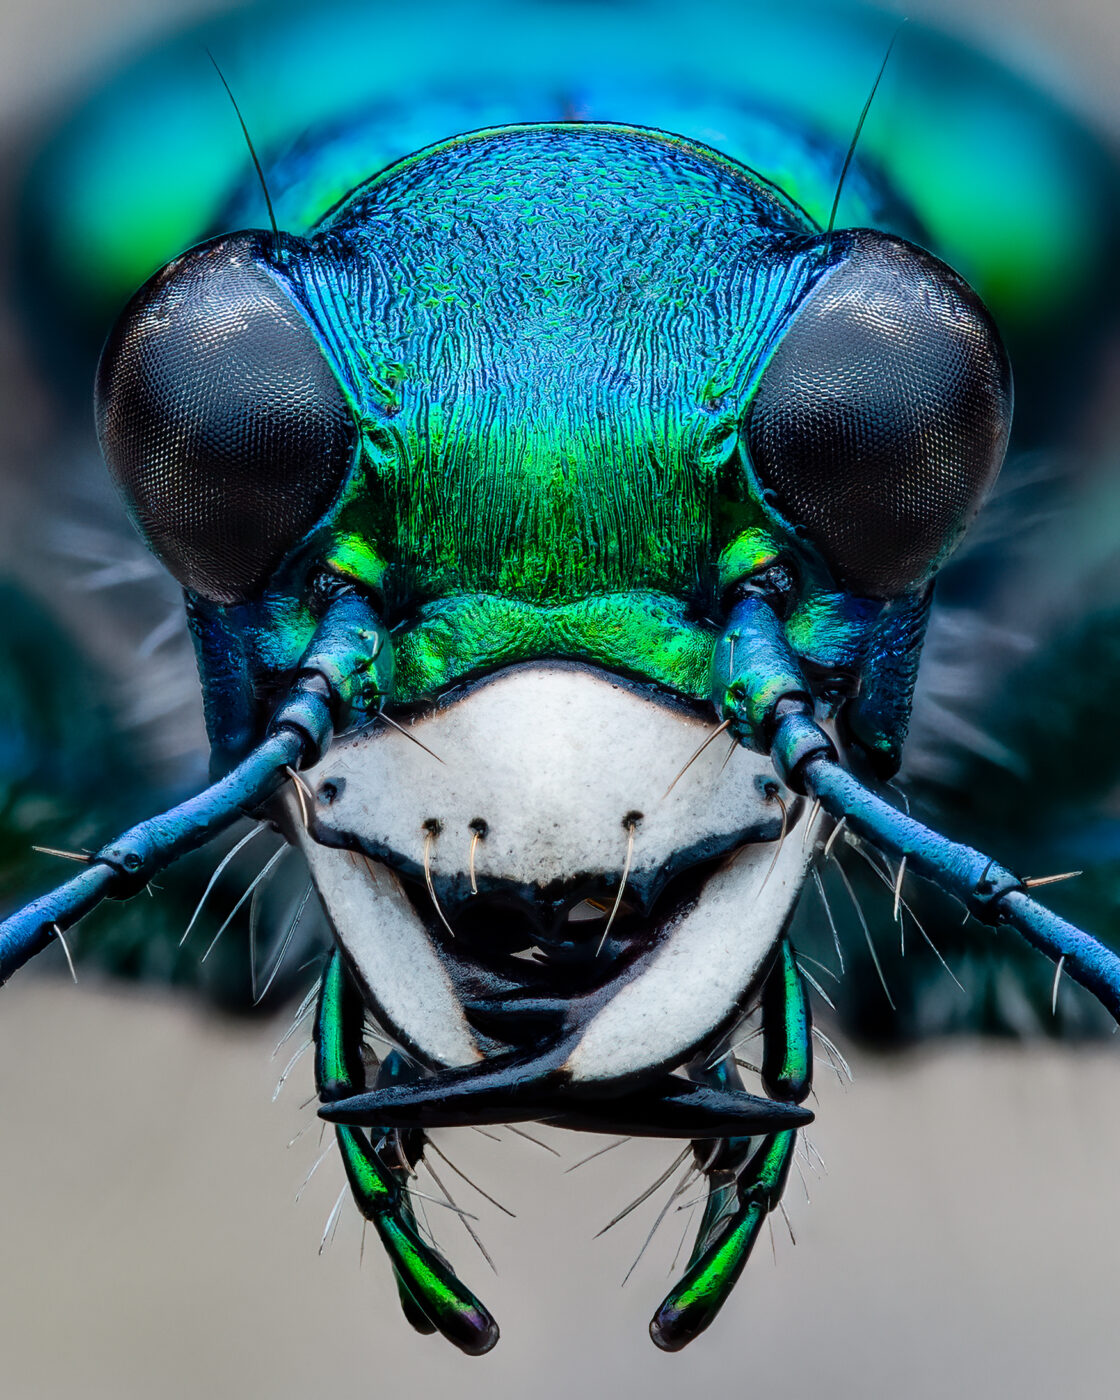 51 shot handheld focus stack of a living six-spotted tiger beetle found resting under some bark of a downed tree.